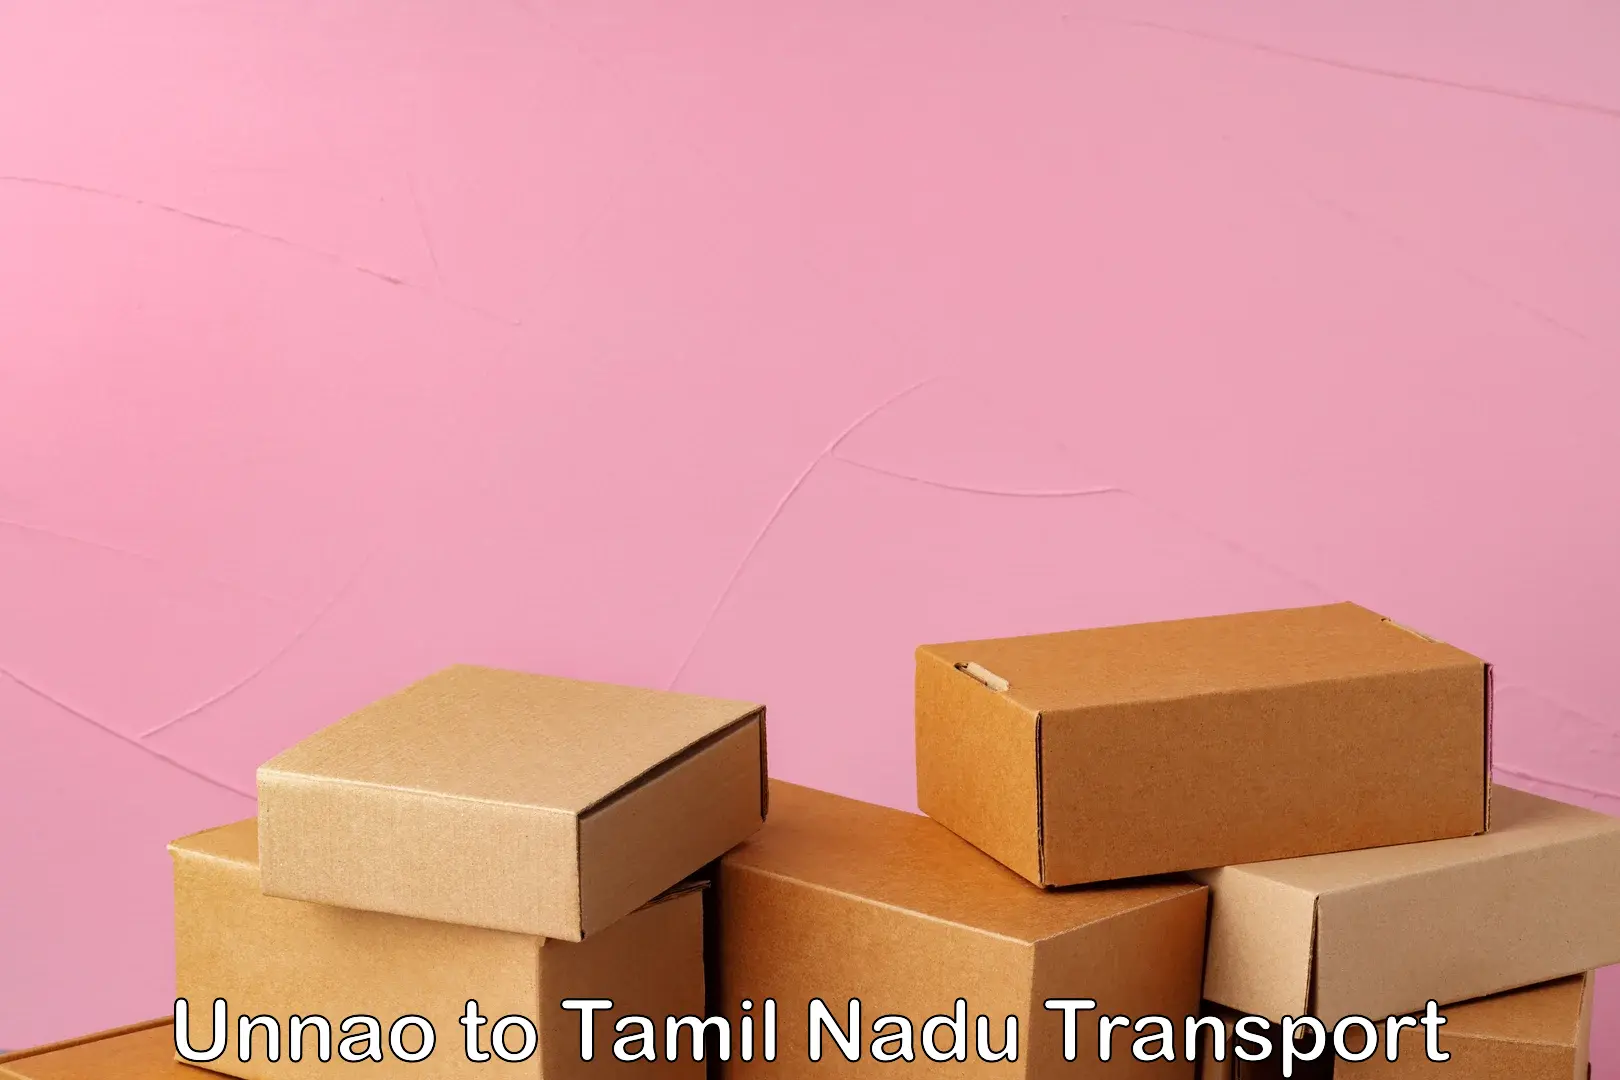 Shipping partner Unnao to Vellore Institute of Technology